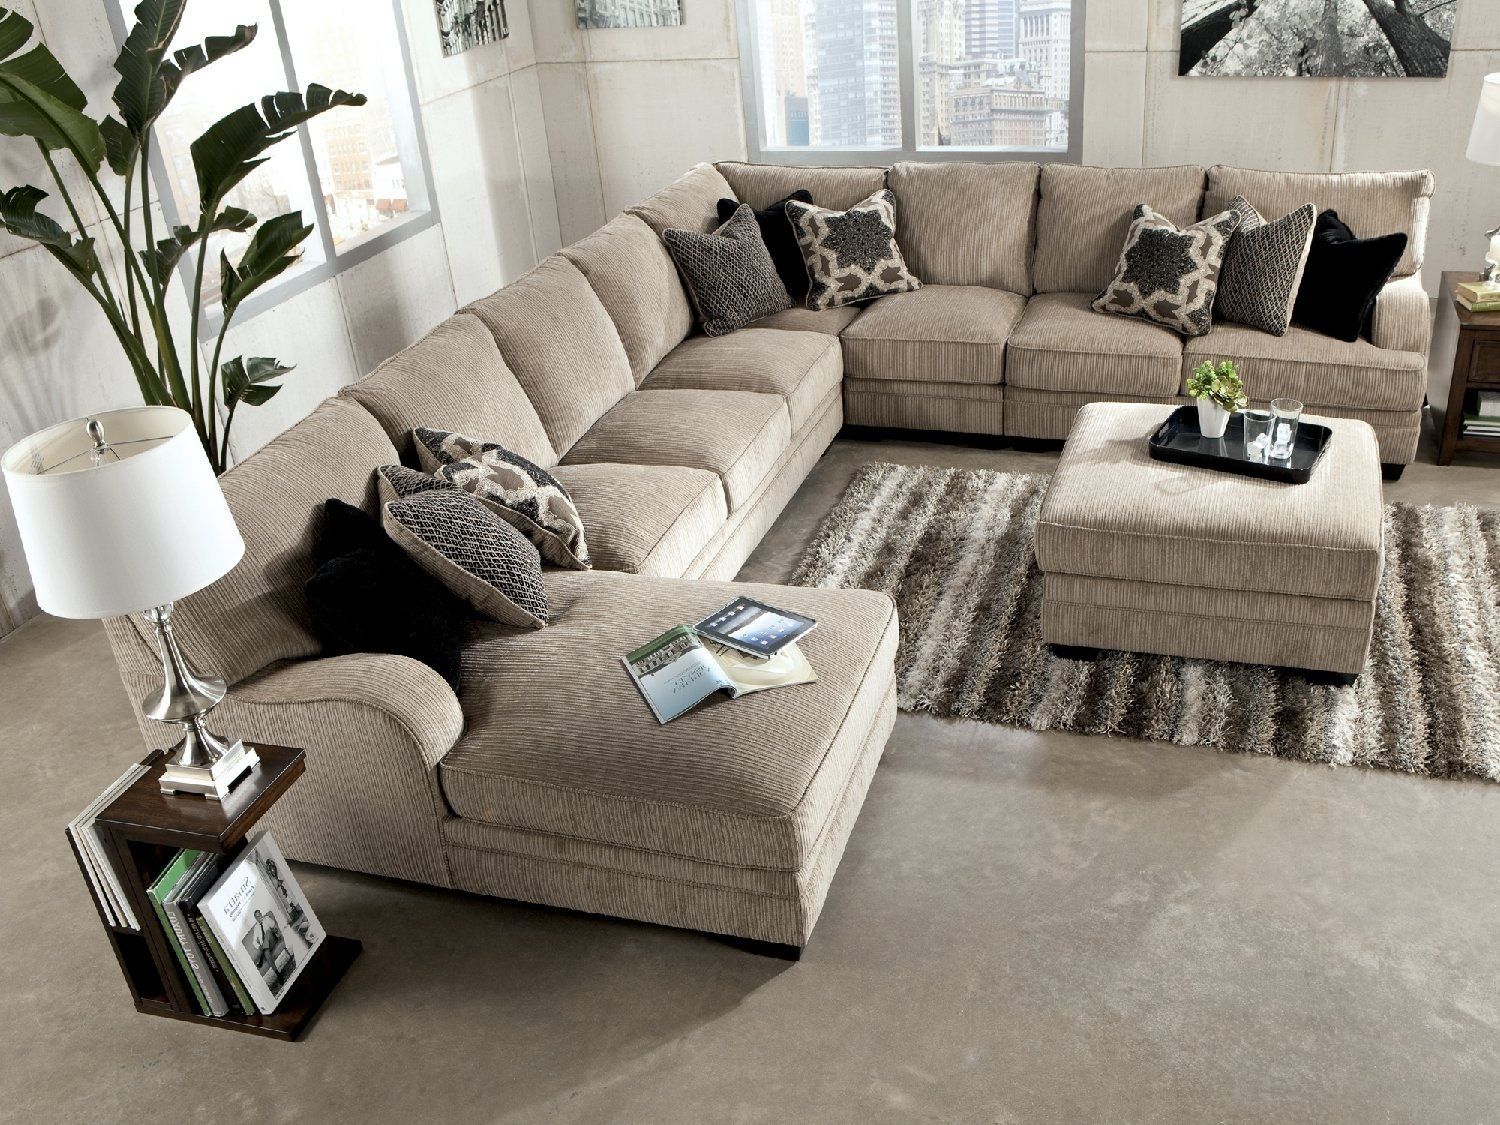 Sofa : Corner Couch Small Sectional With Ottoman L Shaped Leather For Sectionals With Chaise And Ottoman (View 7 of 15)